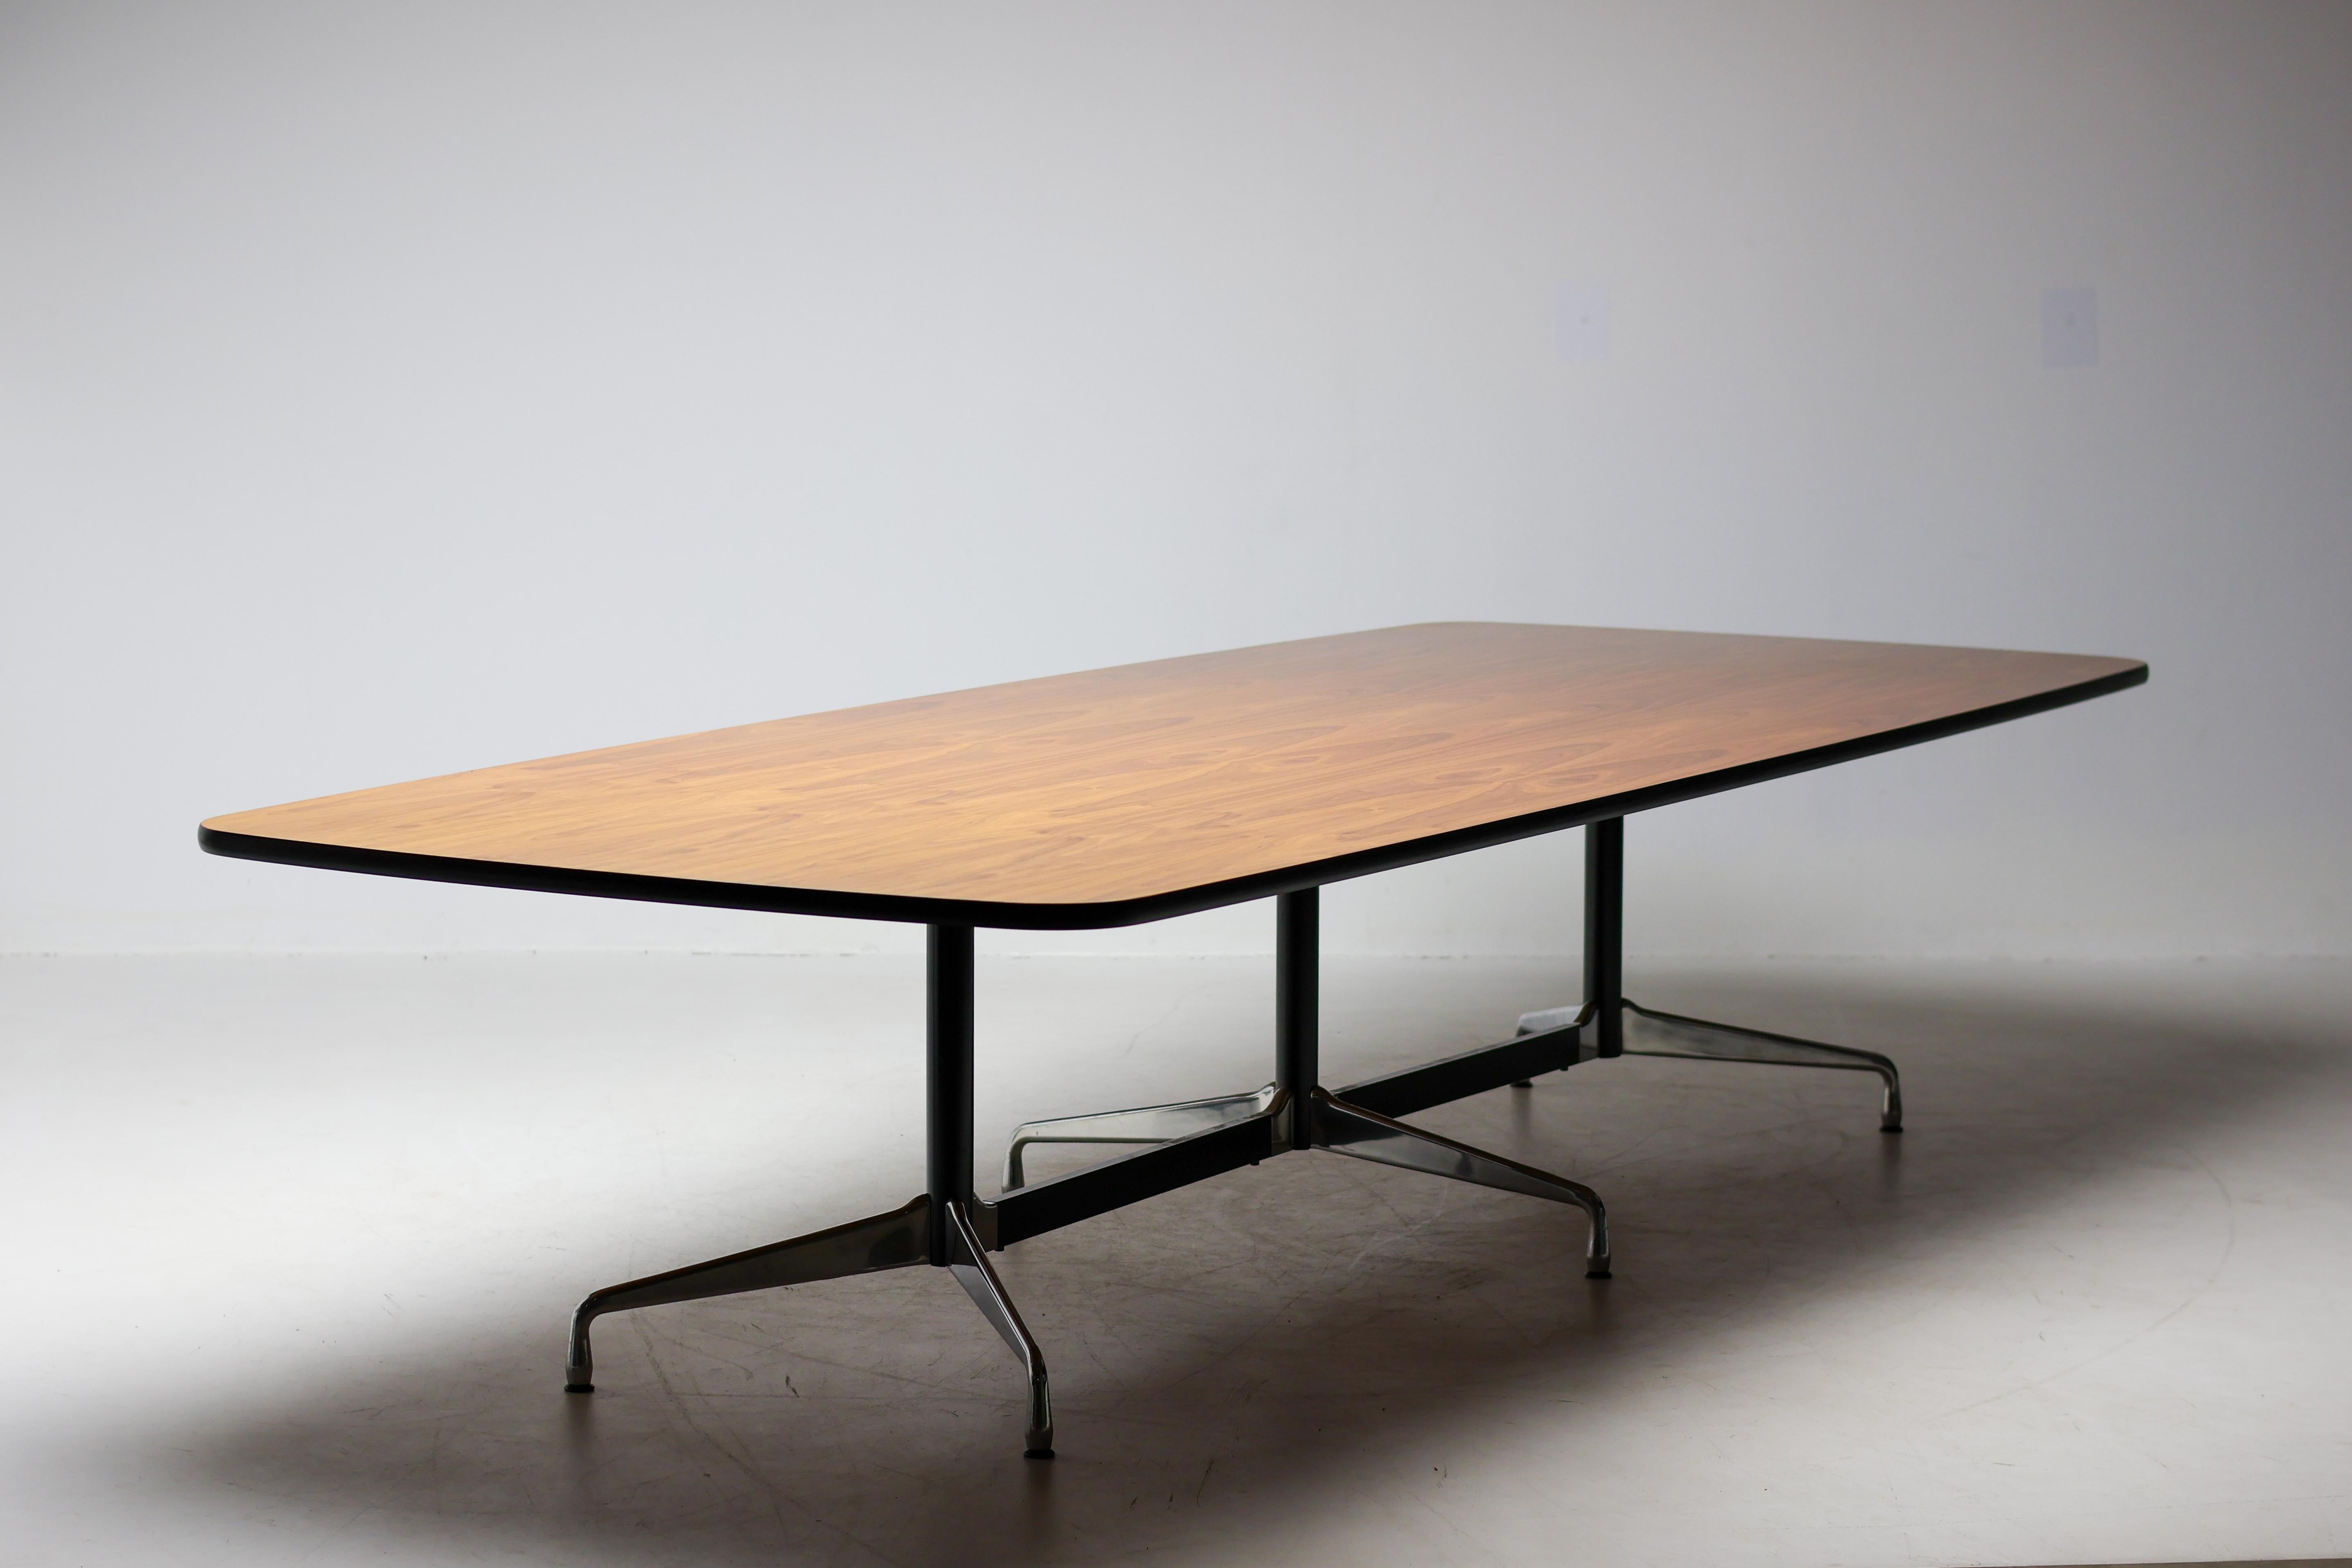 Very large Charles & Ray Eames Segmented Base conference table made by Vitra in 2007.
Custom order walnut book matched veneer one piece tabletop.
Marked with Vitra label.
Used until recently in the boardroom of a real estate agent in Amsterdam.
Very